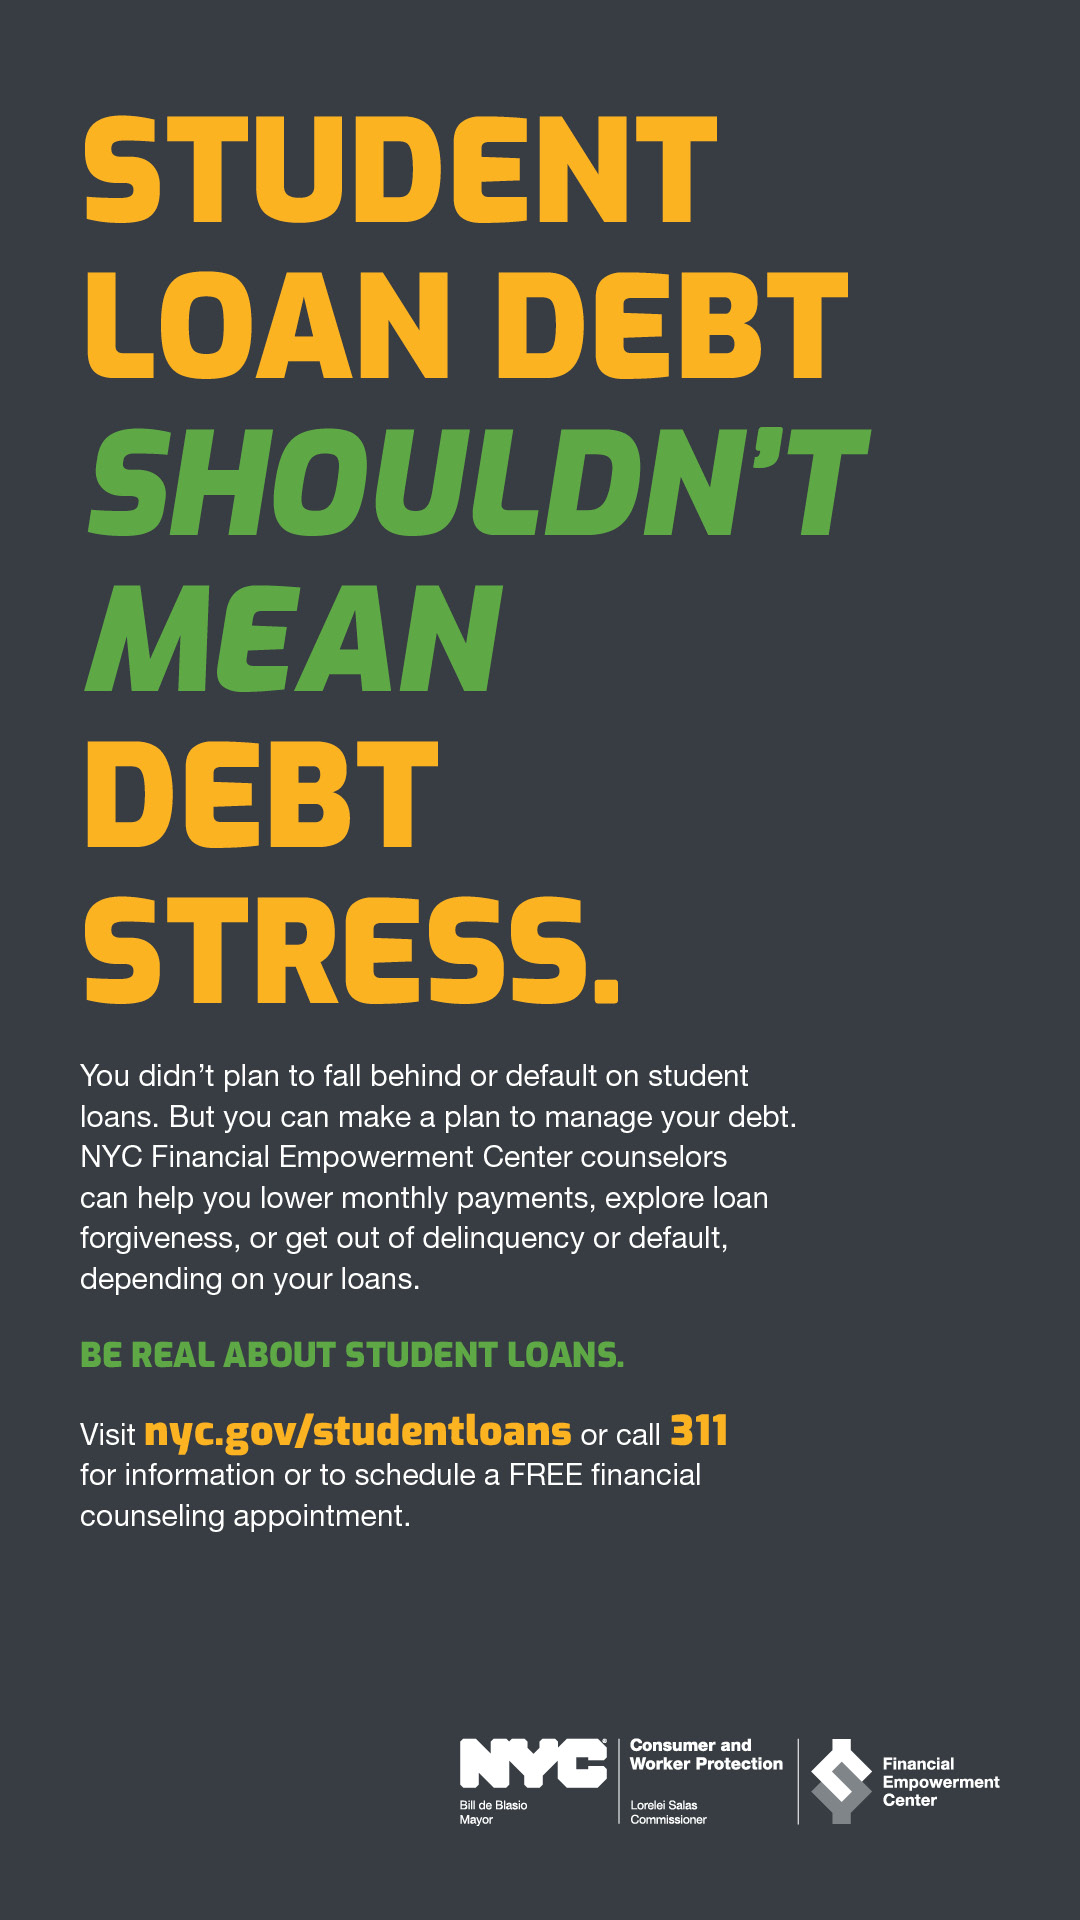 Ad with text STUDENT LOAN DEBT SHOULDN’T MEAN DEBT STRESS